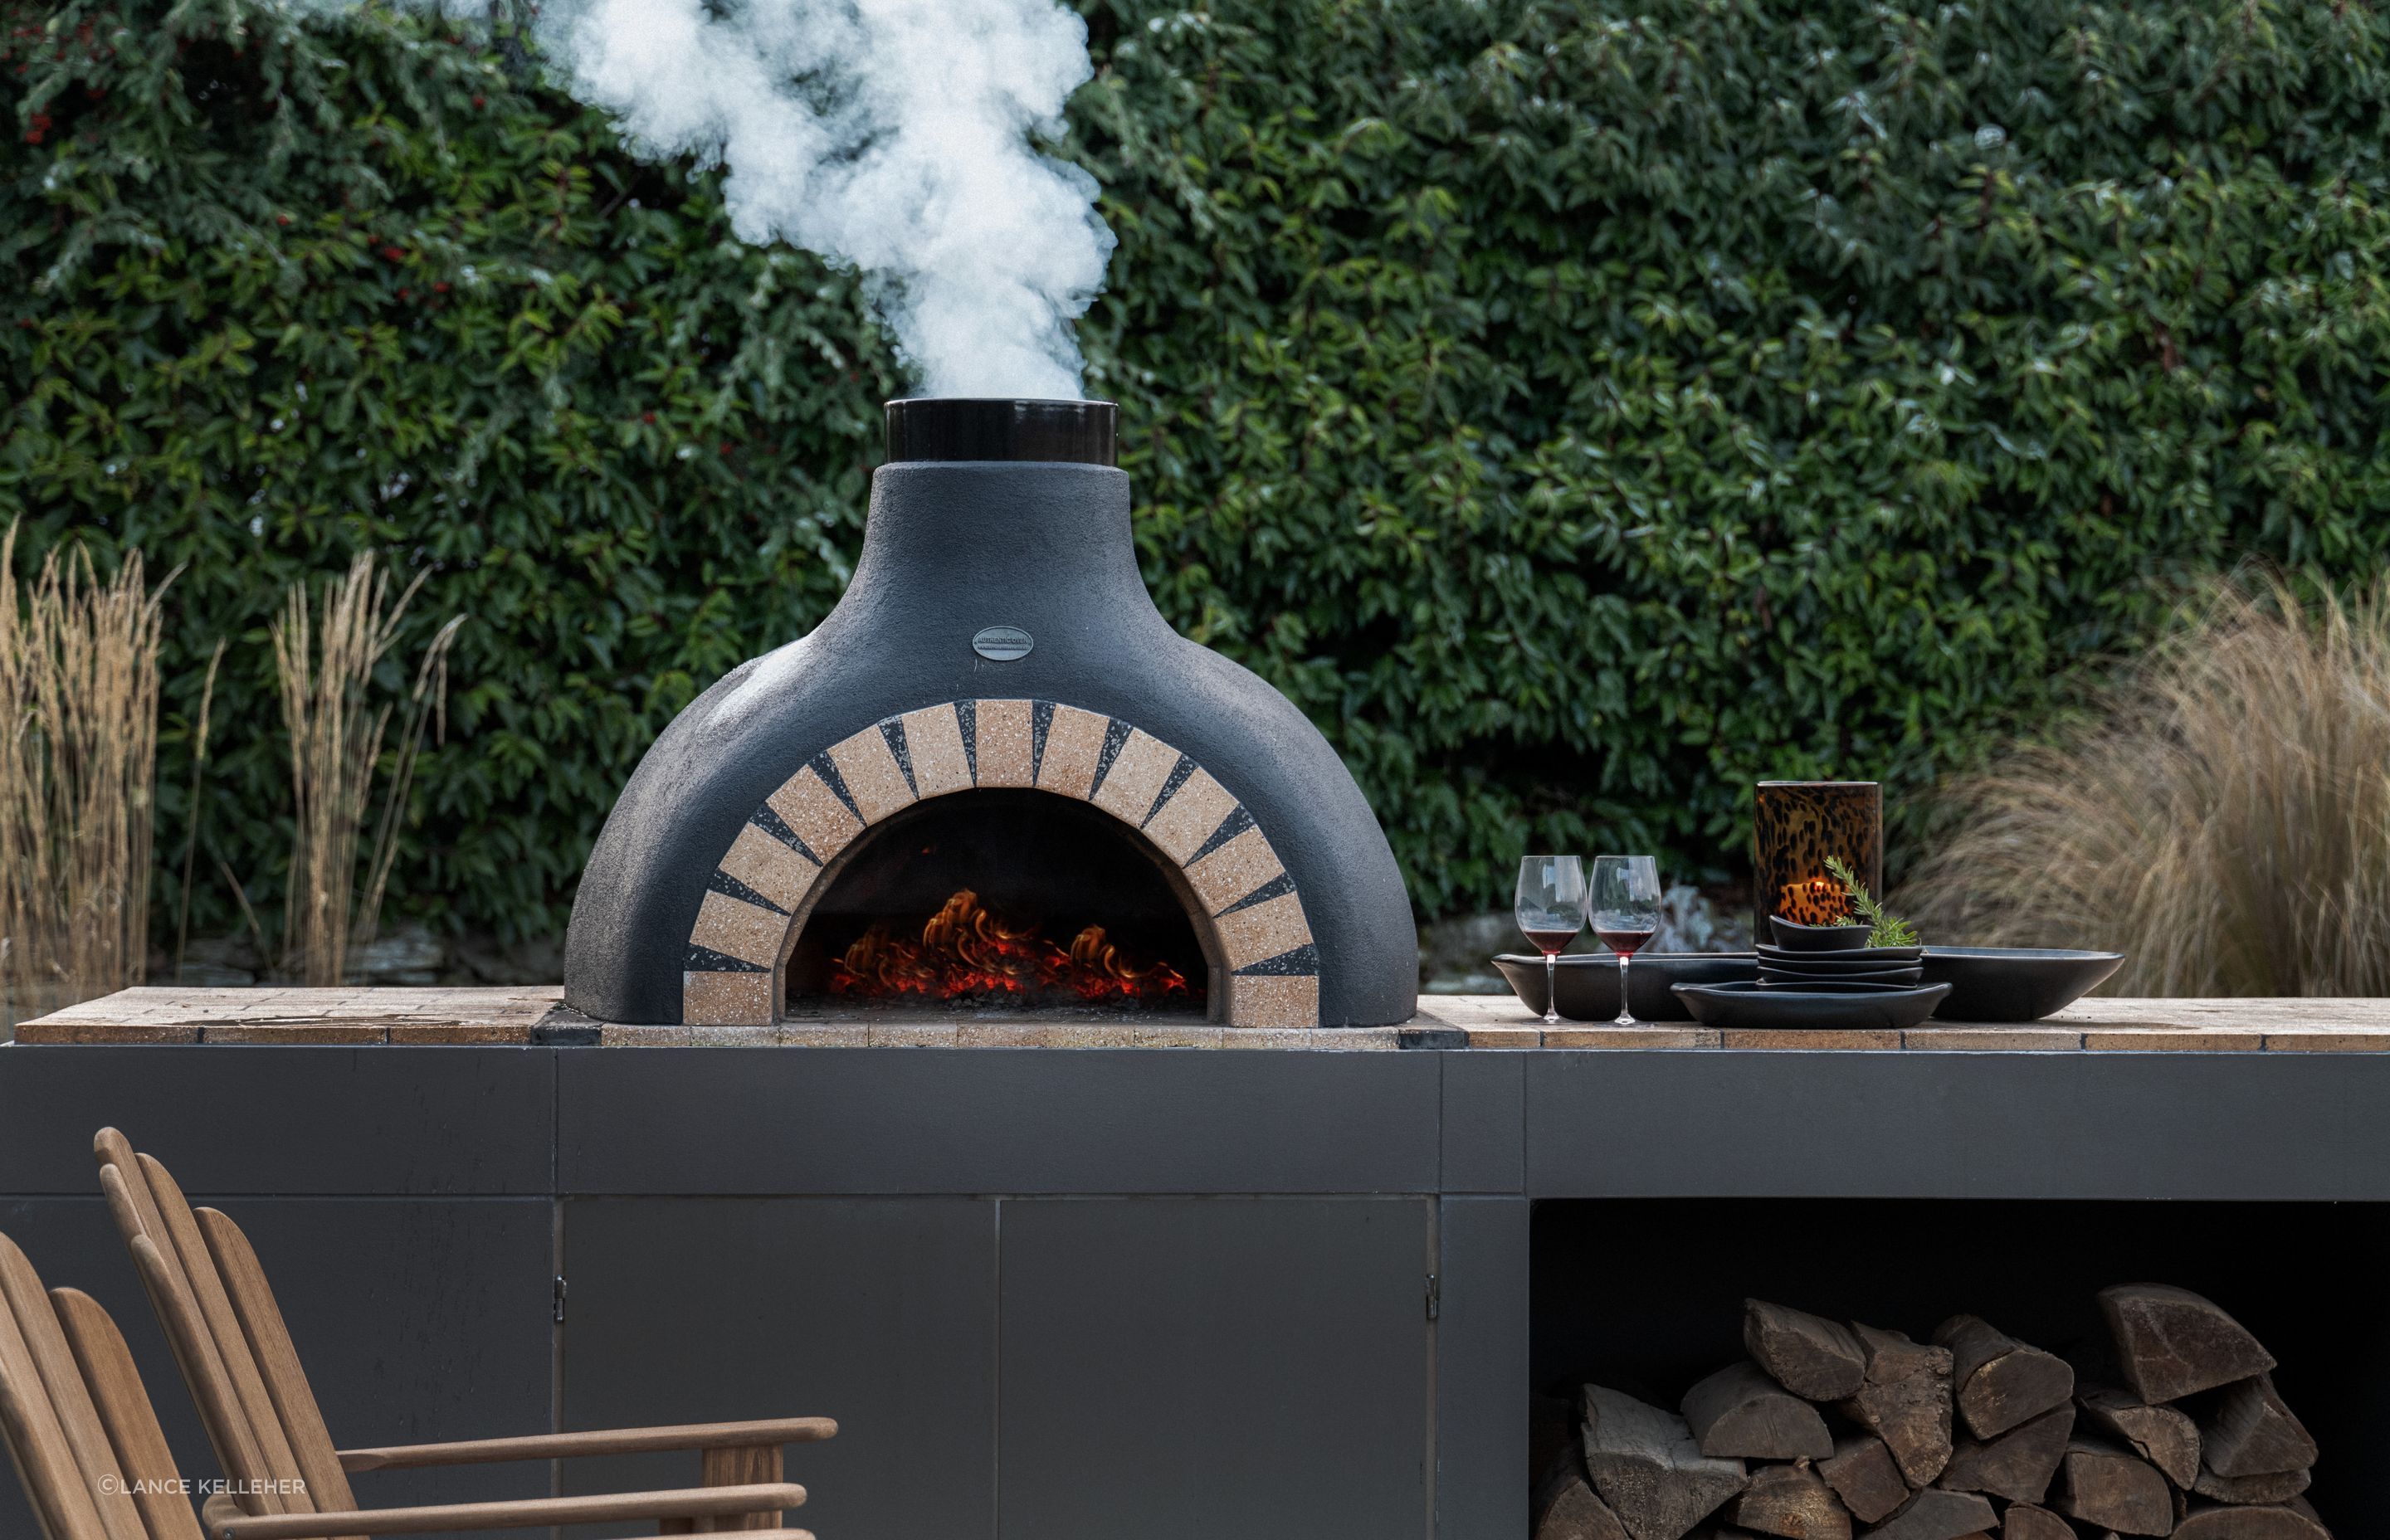 Covenants on the site meant that a large boxy backing board was originally designed behind the pizza oven, but Anna-Carin convinced Millbrook that the biophilic form of the oven was less intrusive in the environment.